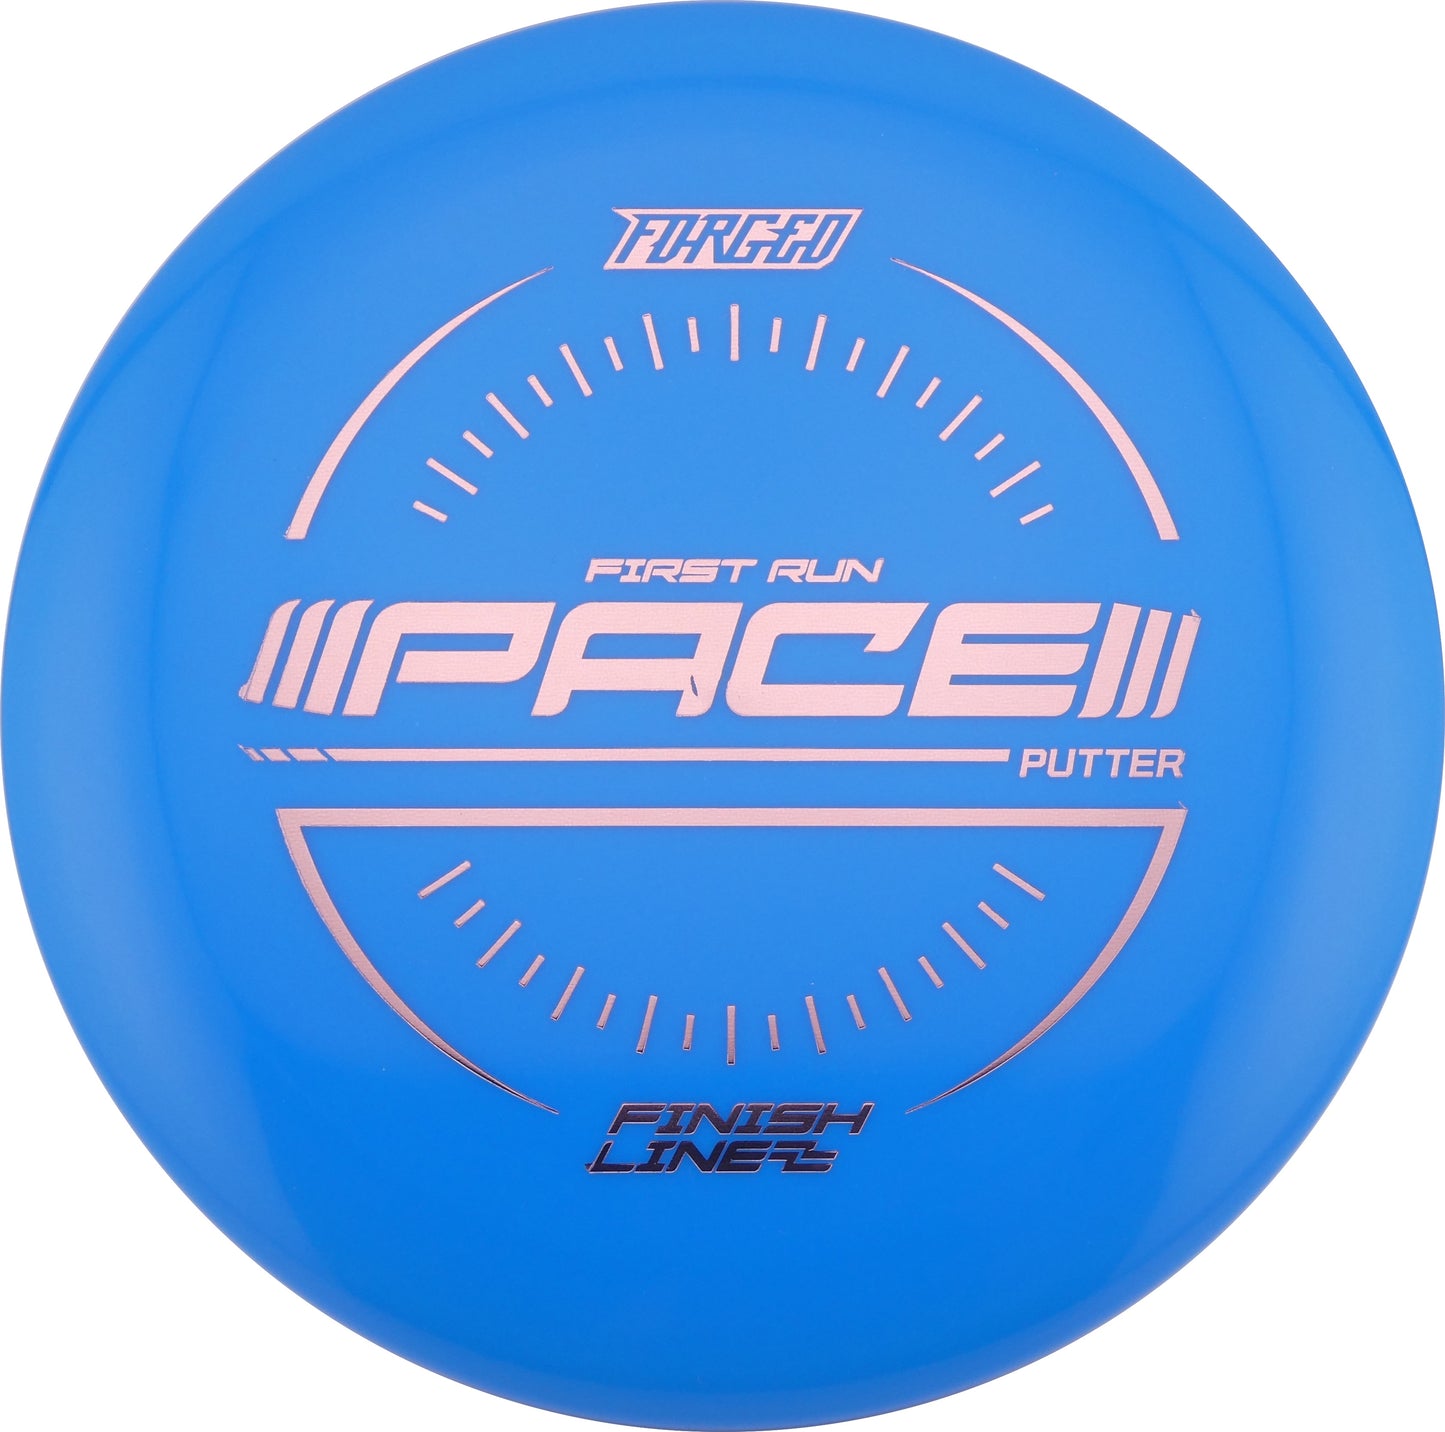 Forged Pace 170-172g